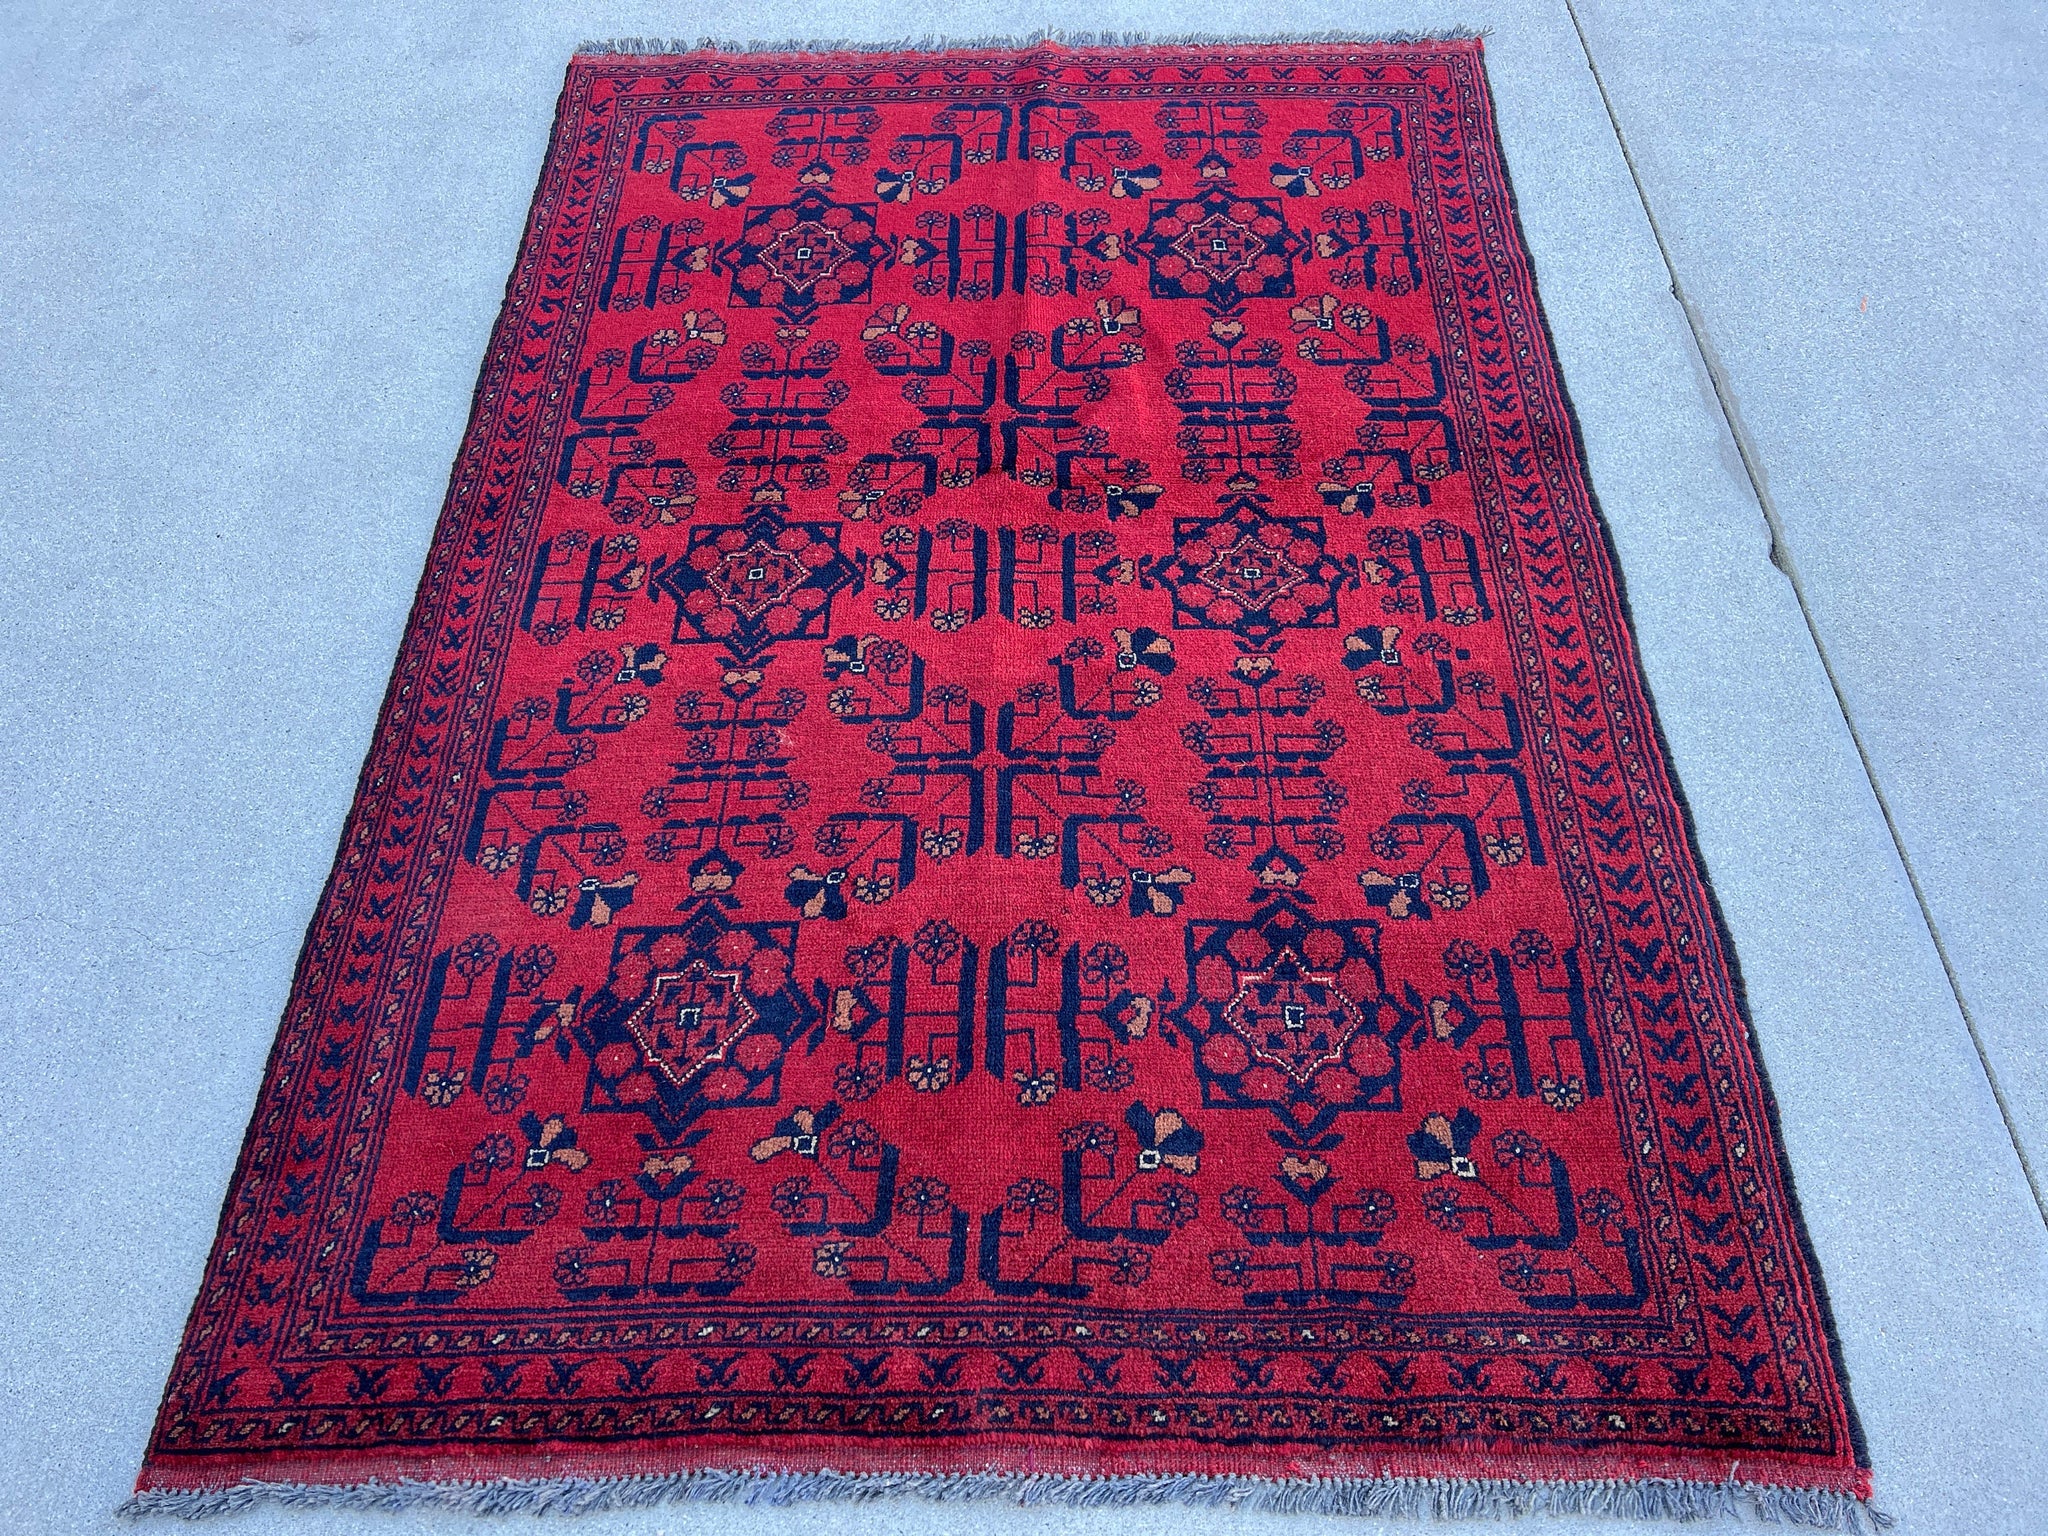 4x5 (150x120) Handmade Afghan Rug | Cherry Red Indigo Brown Midnight Blue Black | Hand Knotted Turkish Wool Bohemian Floral Persian